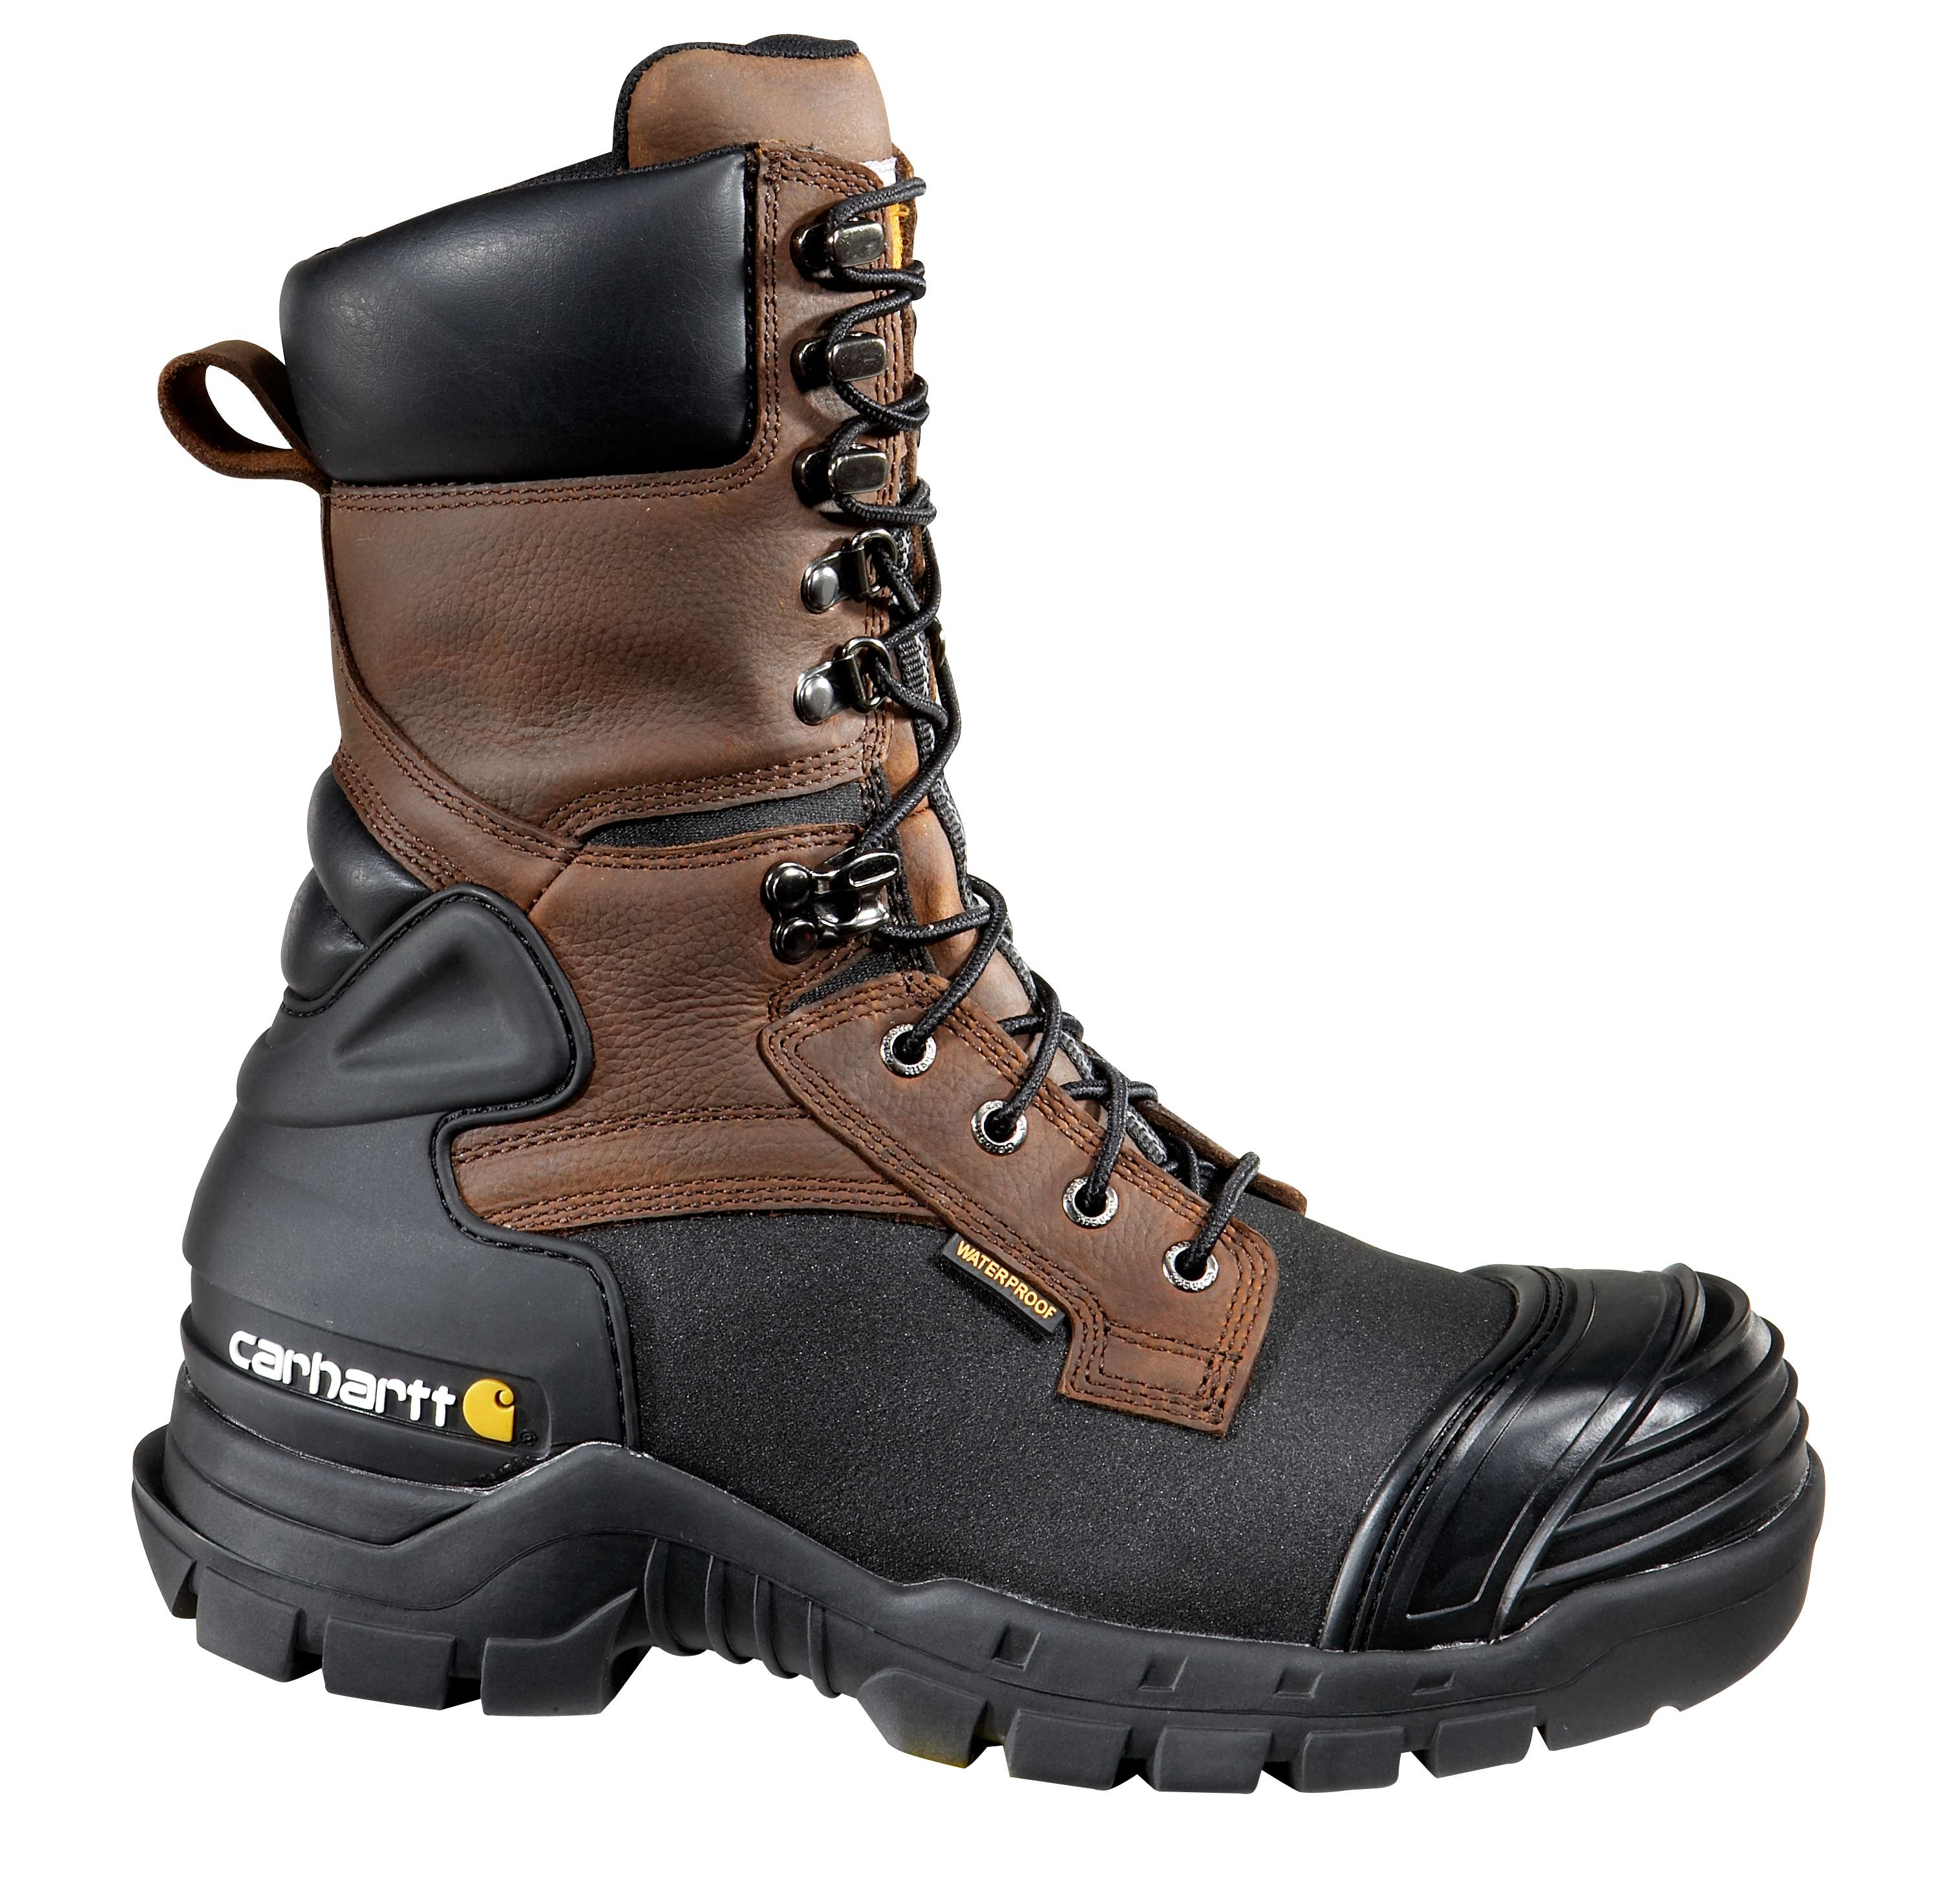 Composite Toe Rubber Work Boots